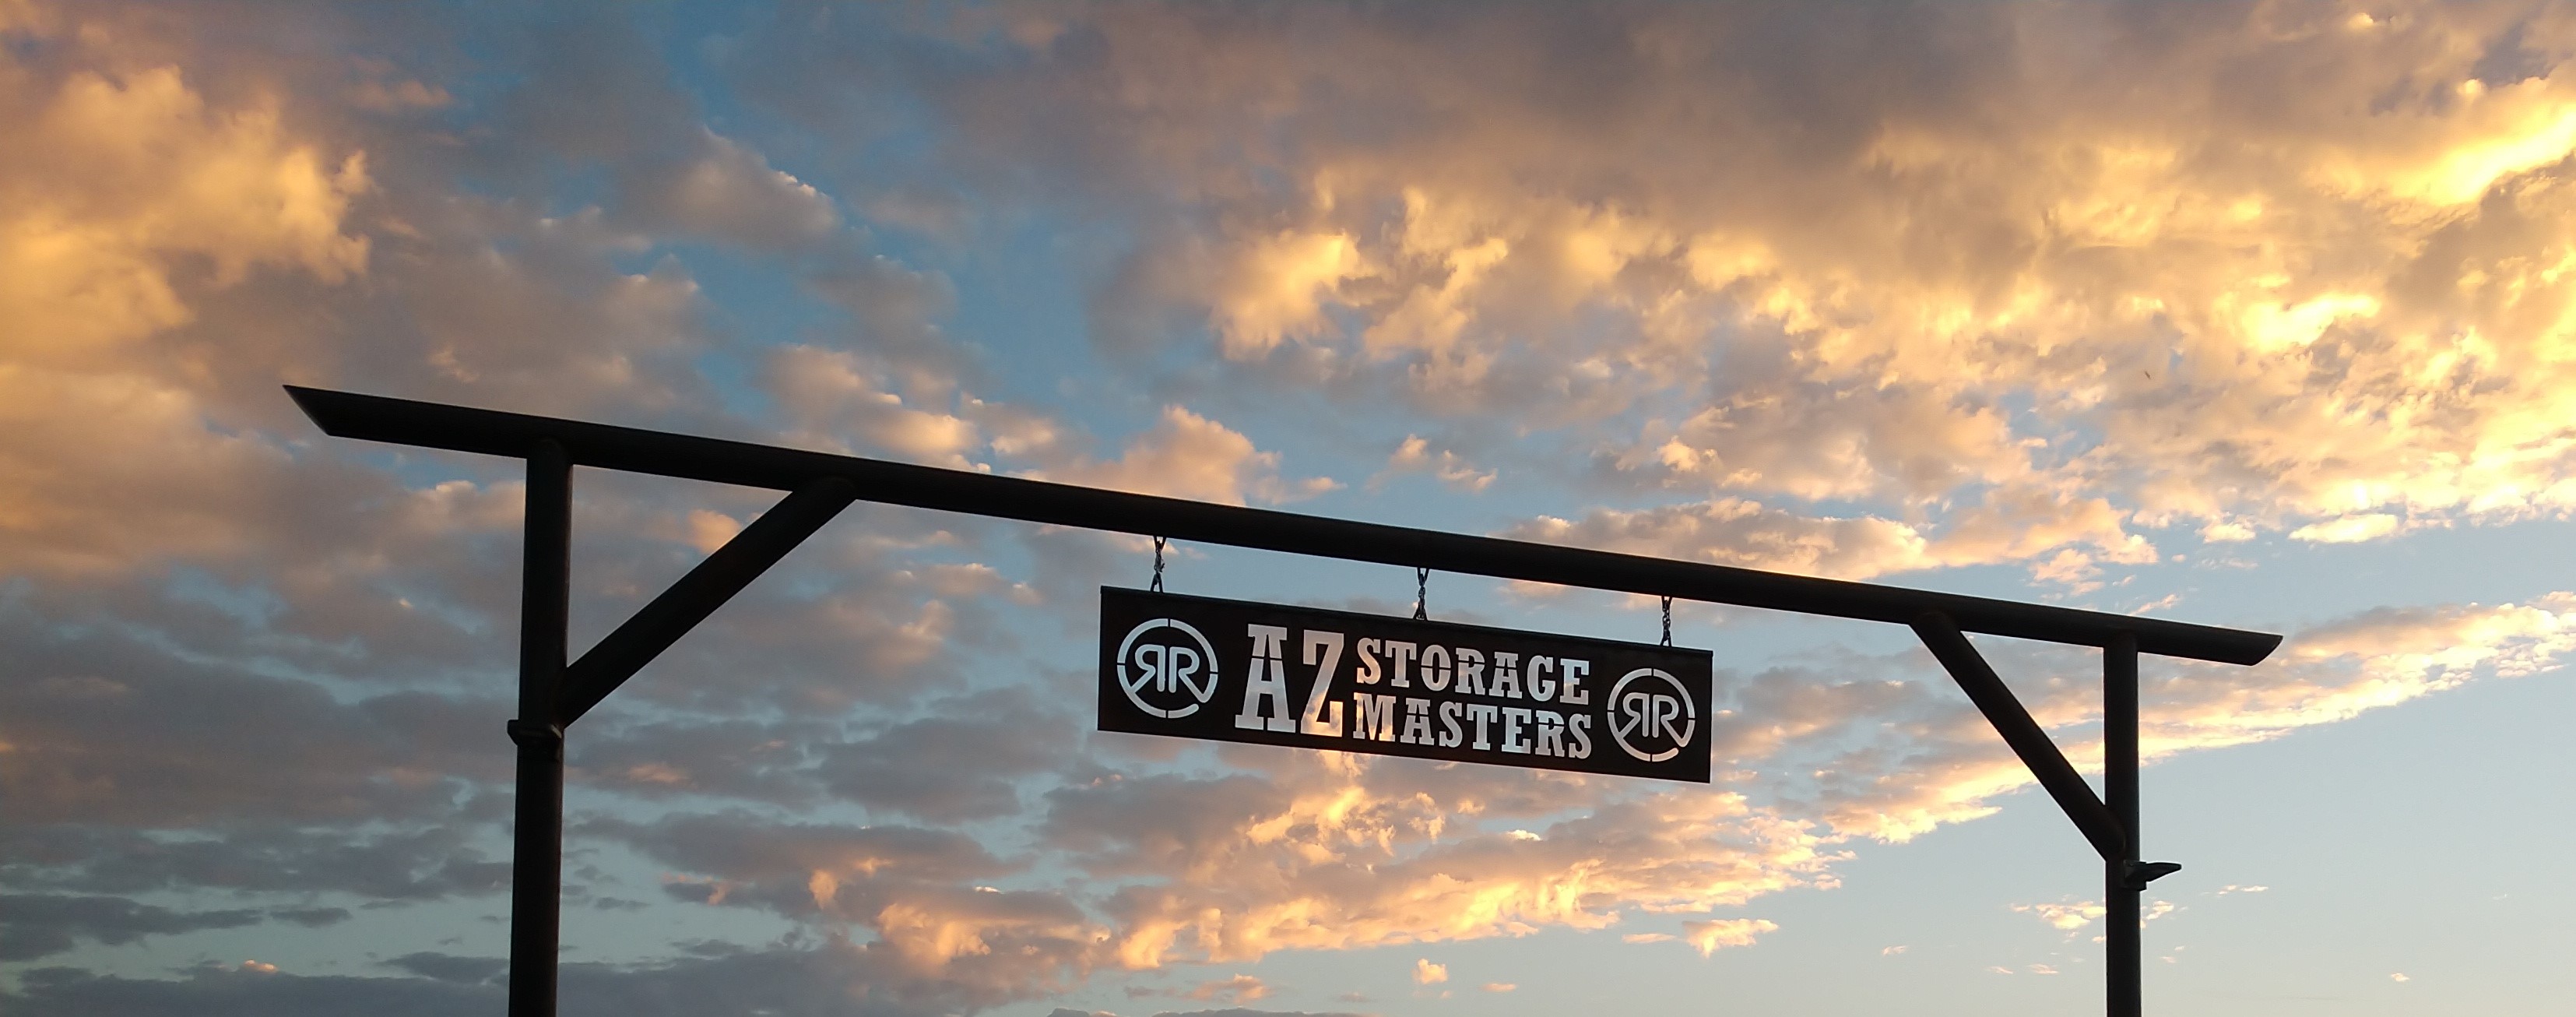 Arizona Storage Masters - Secure Storage and Outdoor RV/Boat/Vehicle Parking in Apache Junction, AZ